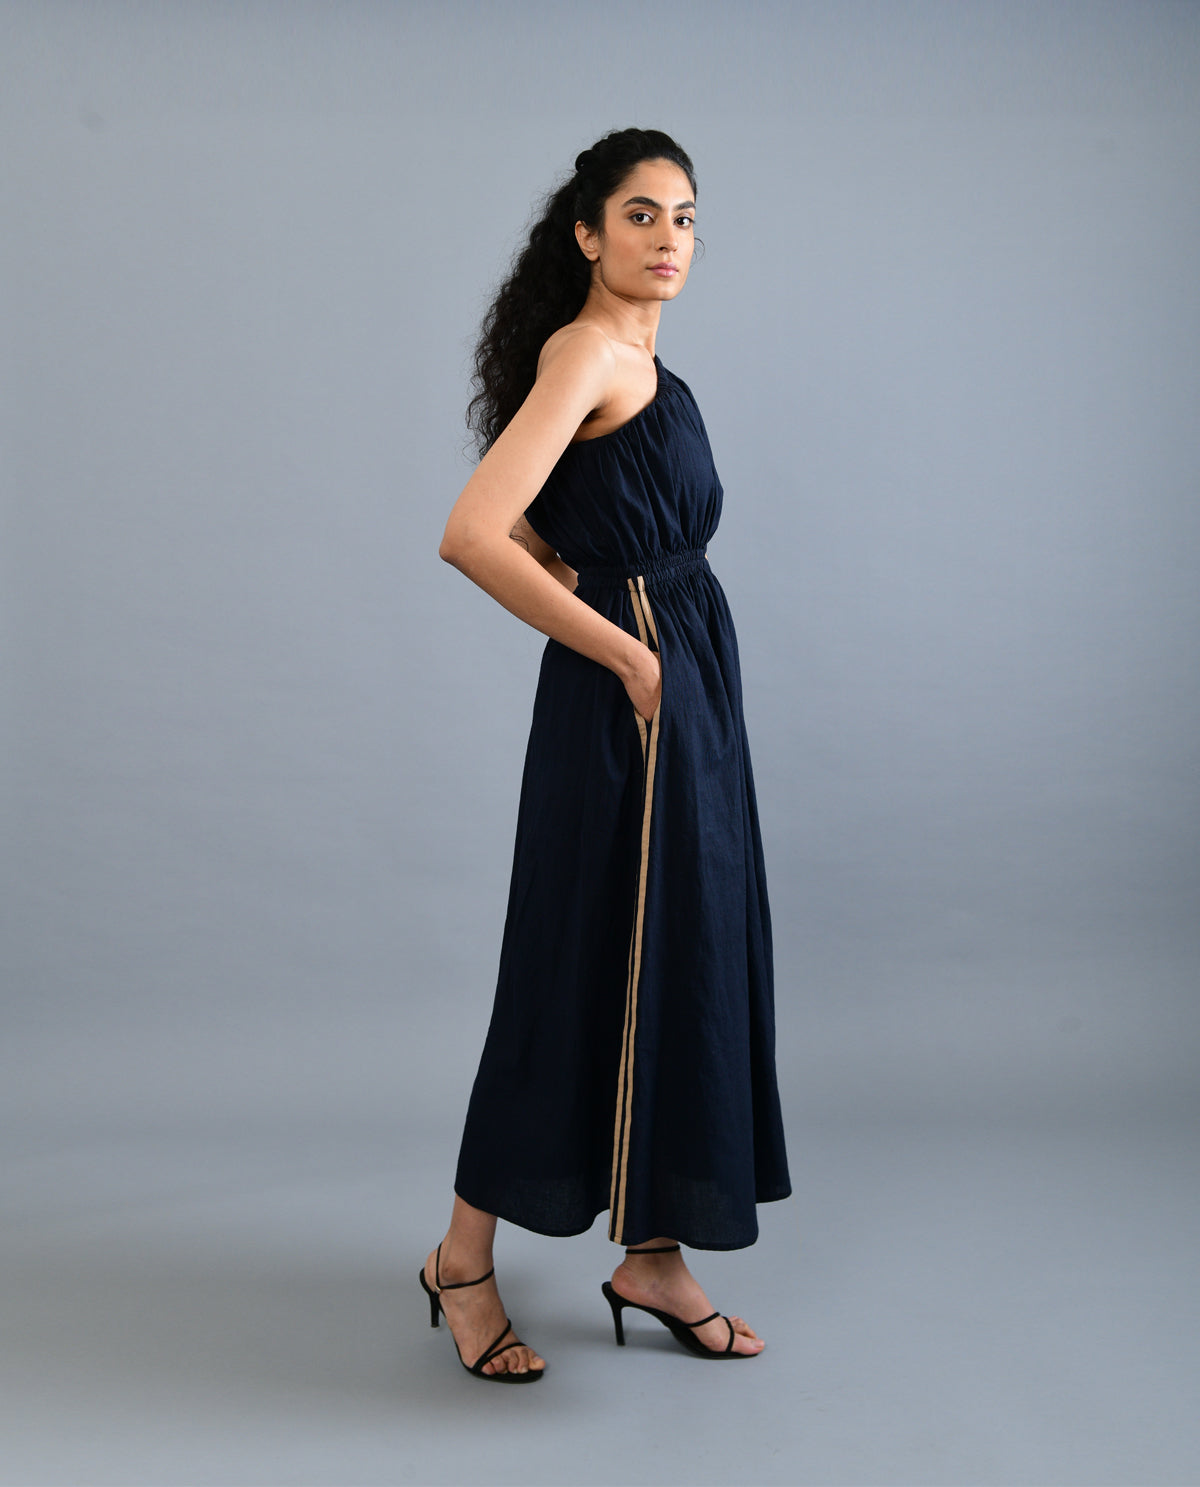 Black Solid Midi Dress at Kamakhyaa by Rias Jaipur. This item is Black, Casual Wear, Handloom Cotton, Handspun, Handwoven, Hue, Midi Dresses, One Shoulder Dresses, Relaxed Fit, Solids, Stripes, Womenswear